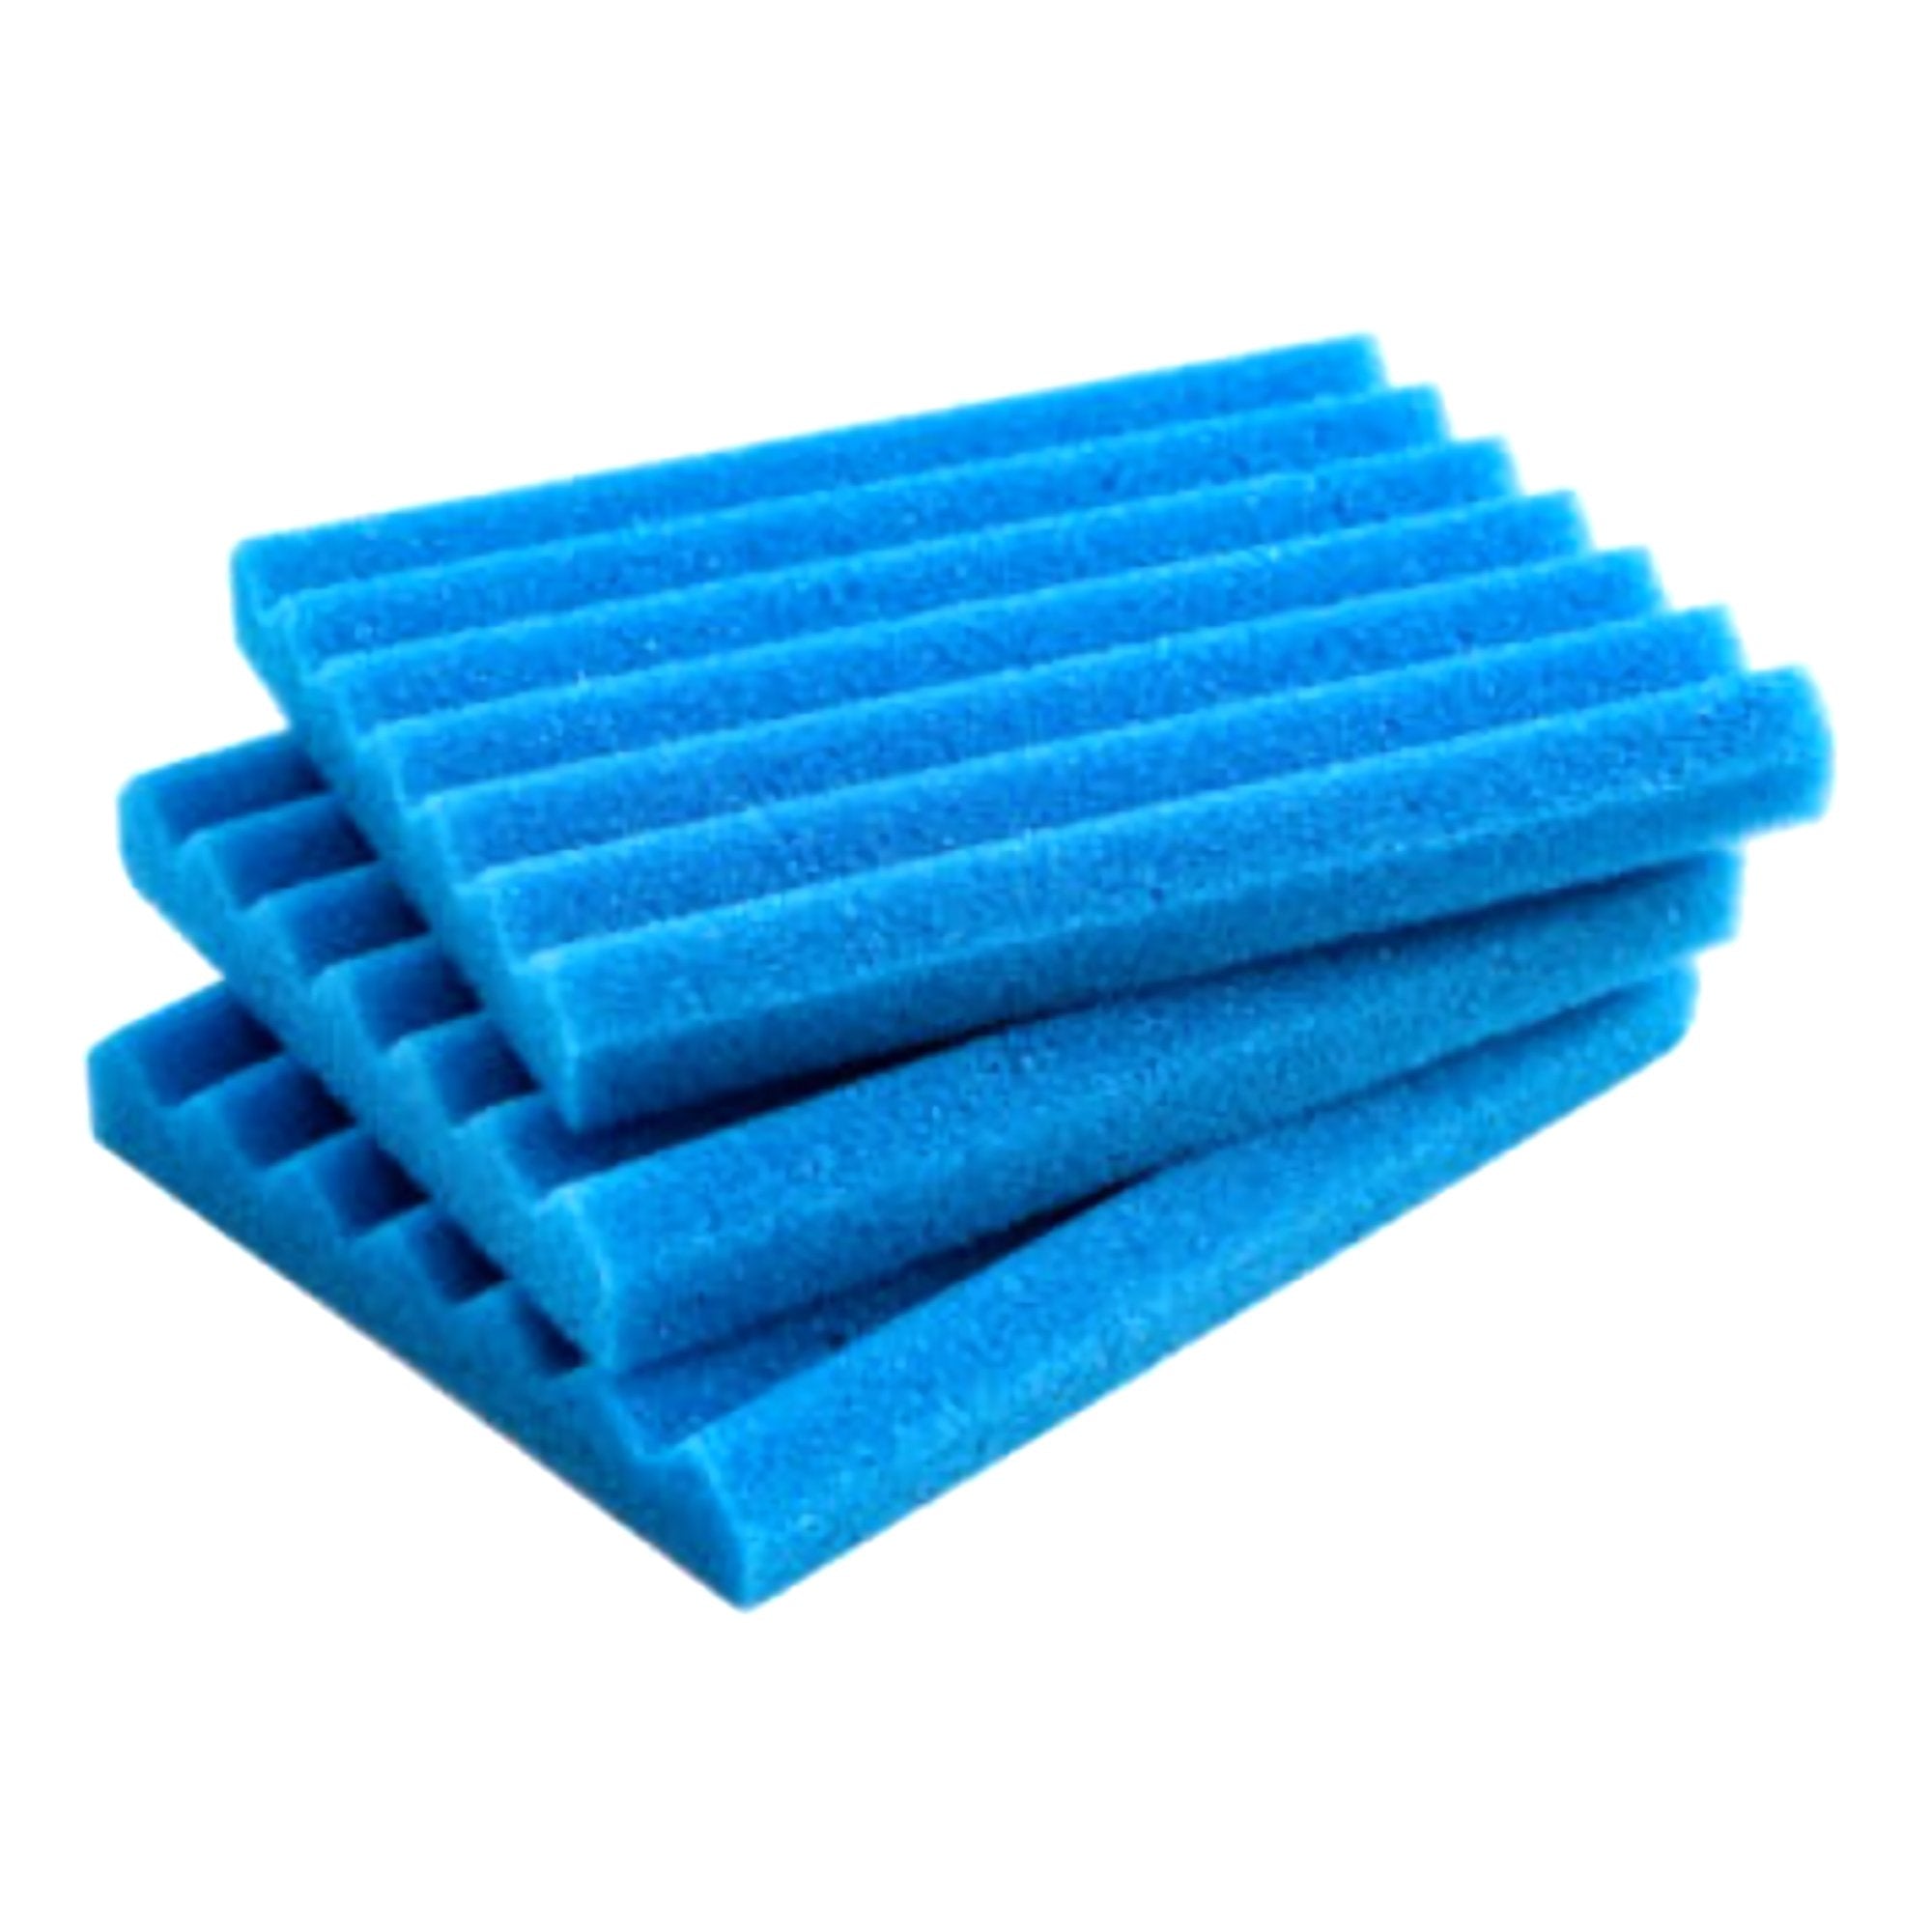 Instrument Cleaning Sponge without Detergent Revital-Ox®